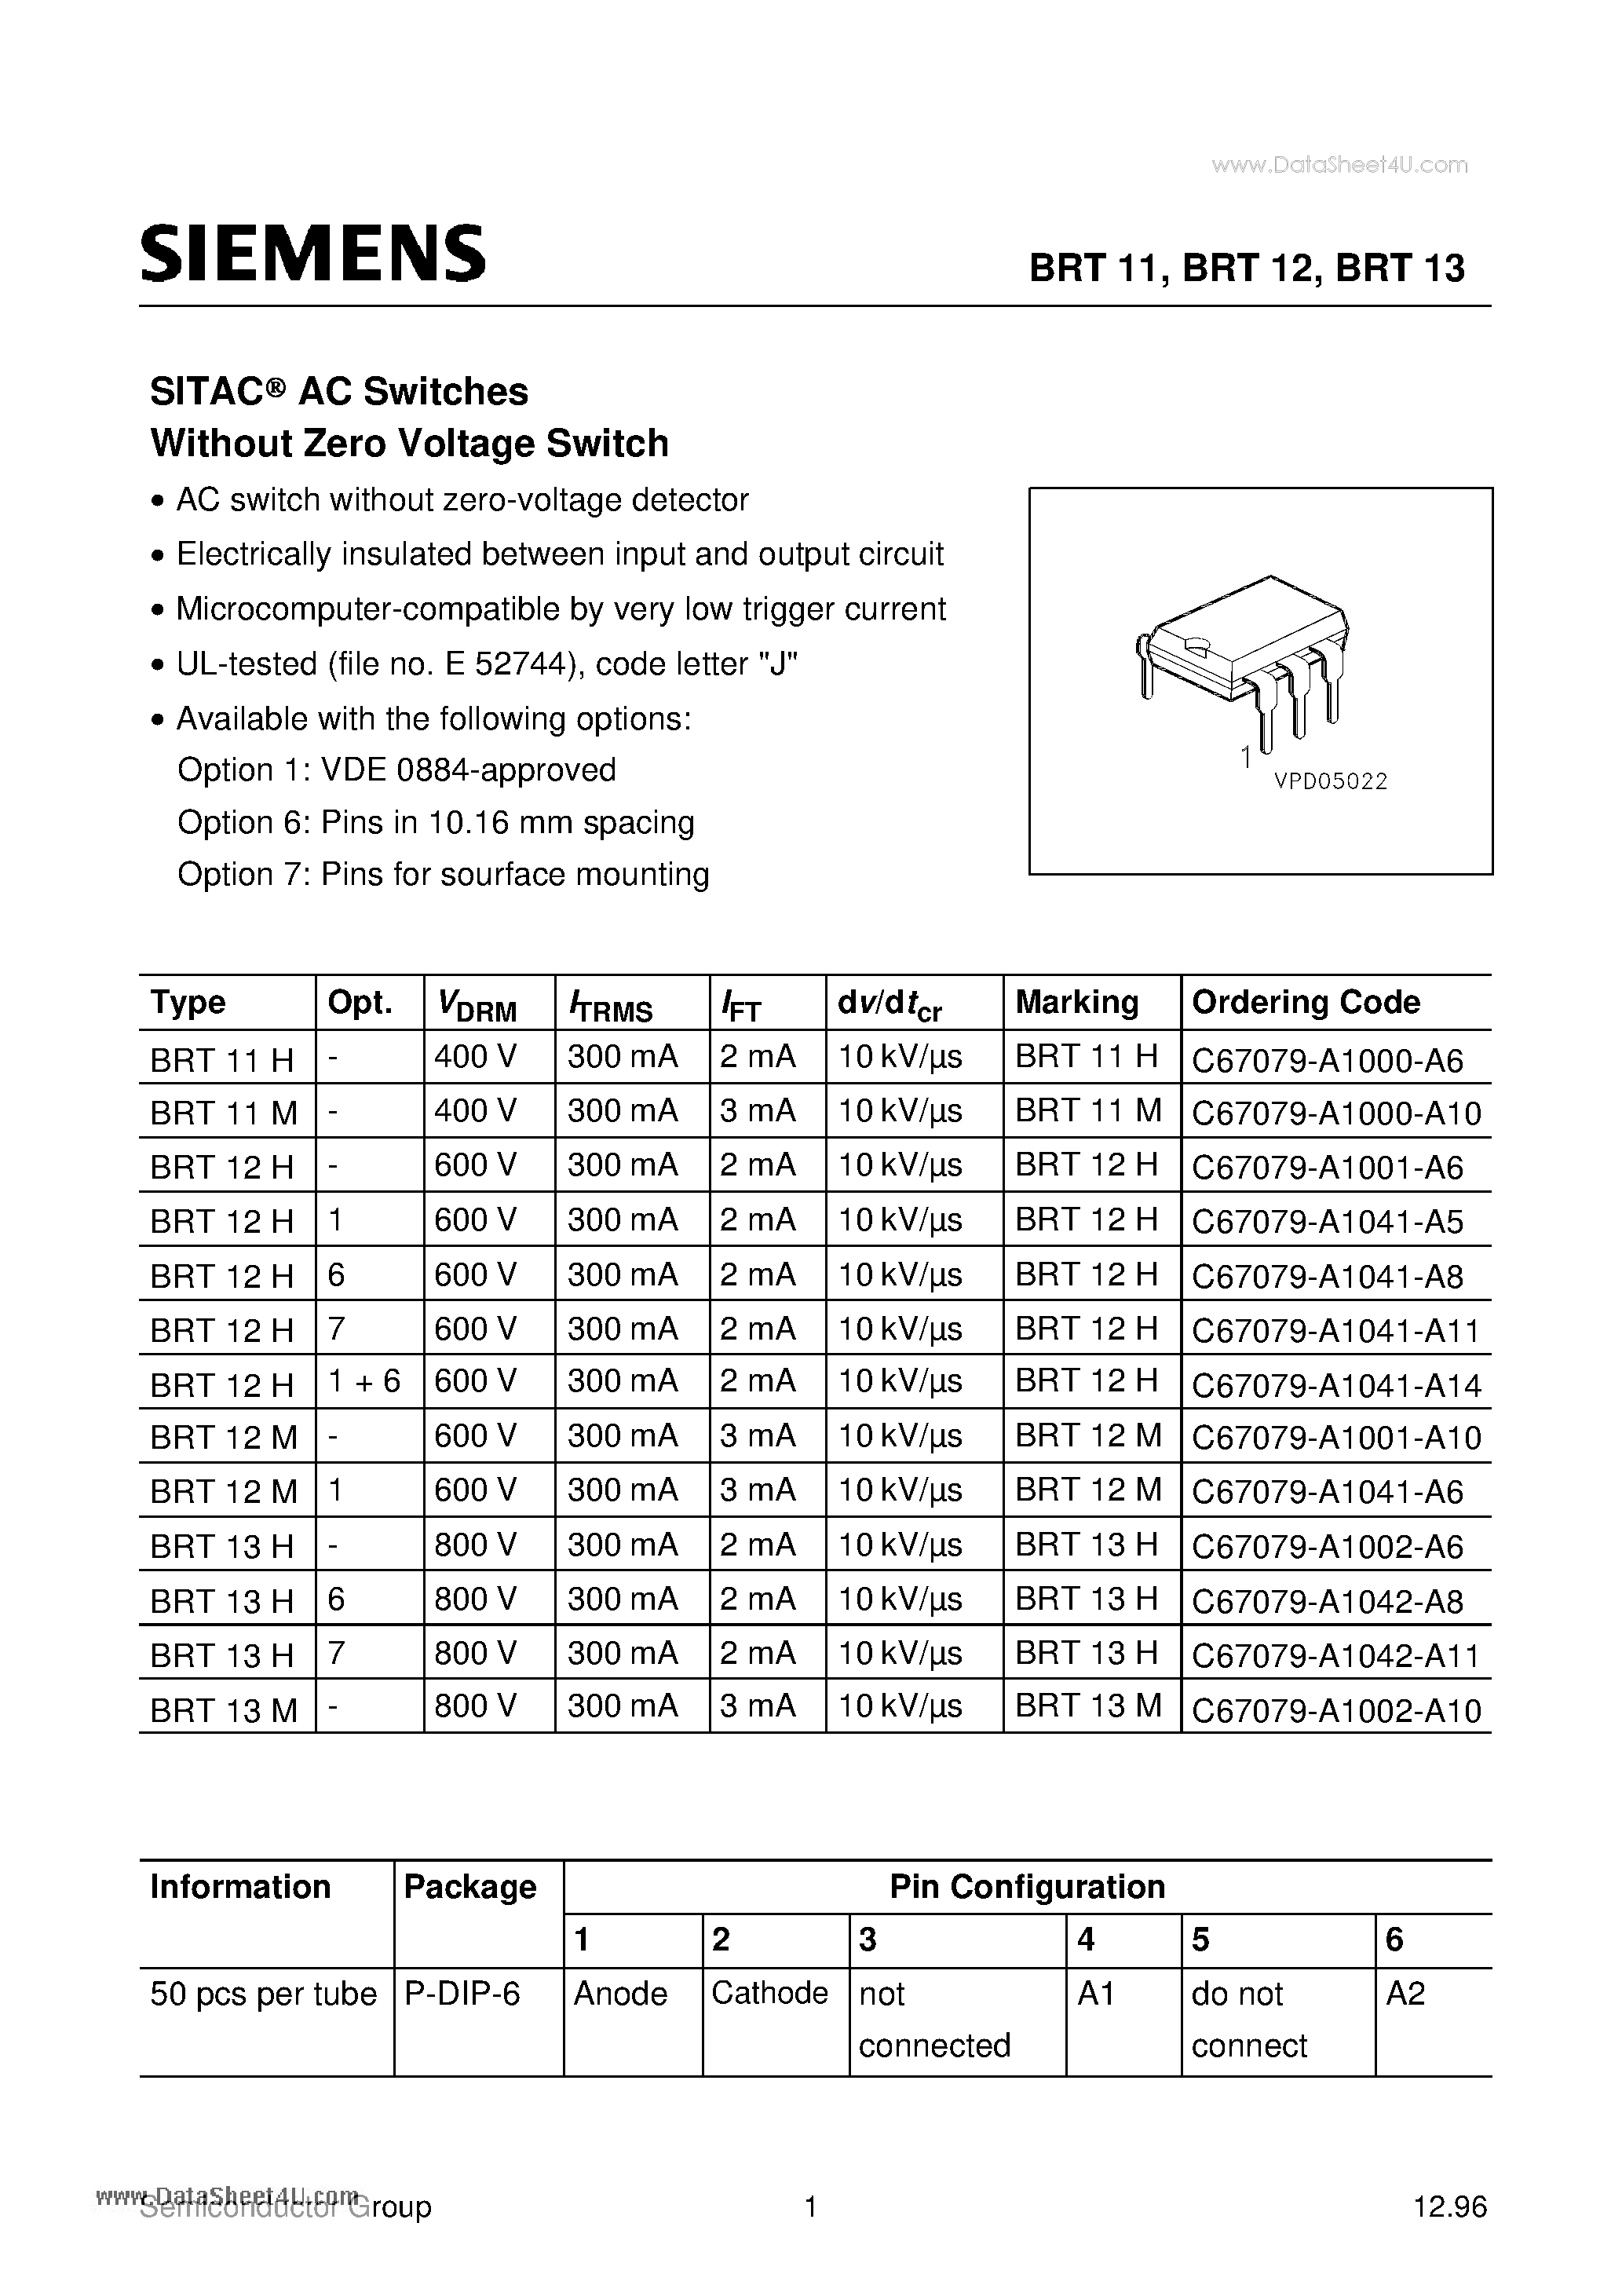 Datasheet BRT11H - SITACO AC Switches Without Zero Voltage Switch page 1